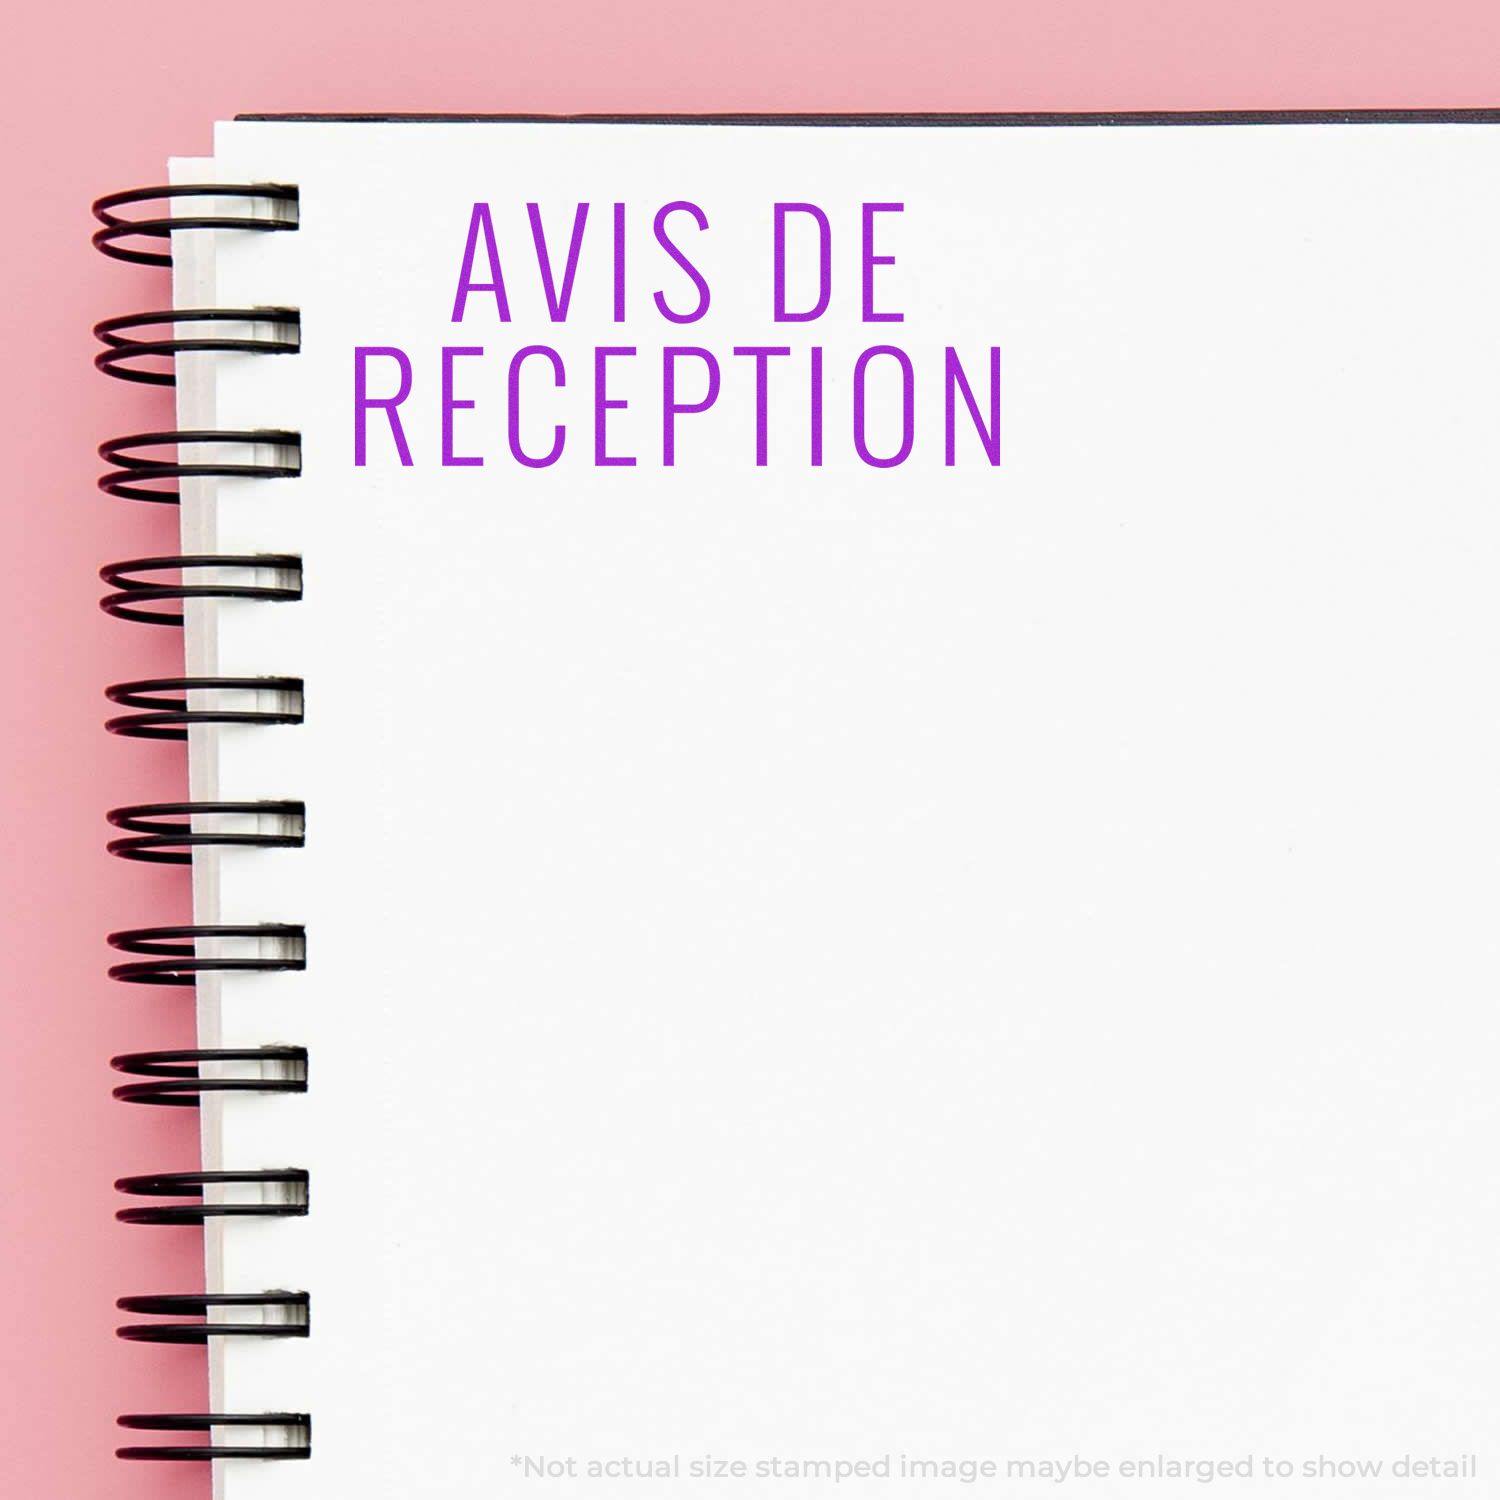 A self-inking stamp with a stamped image showing how the text "AVIS DE RECEPTION" in a large font is displayed by it after stamping.